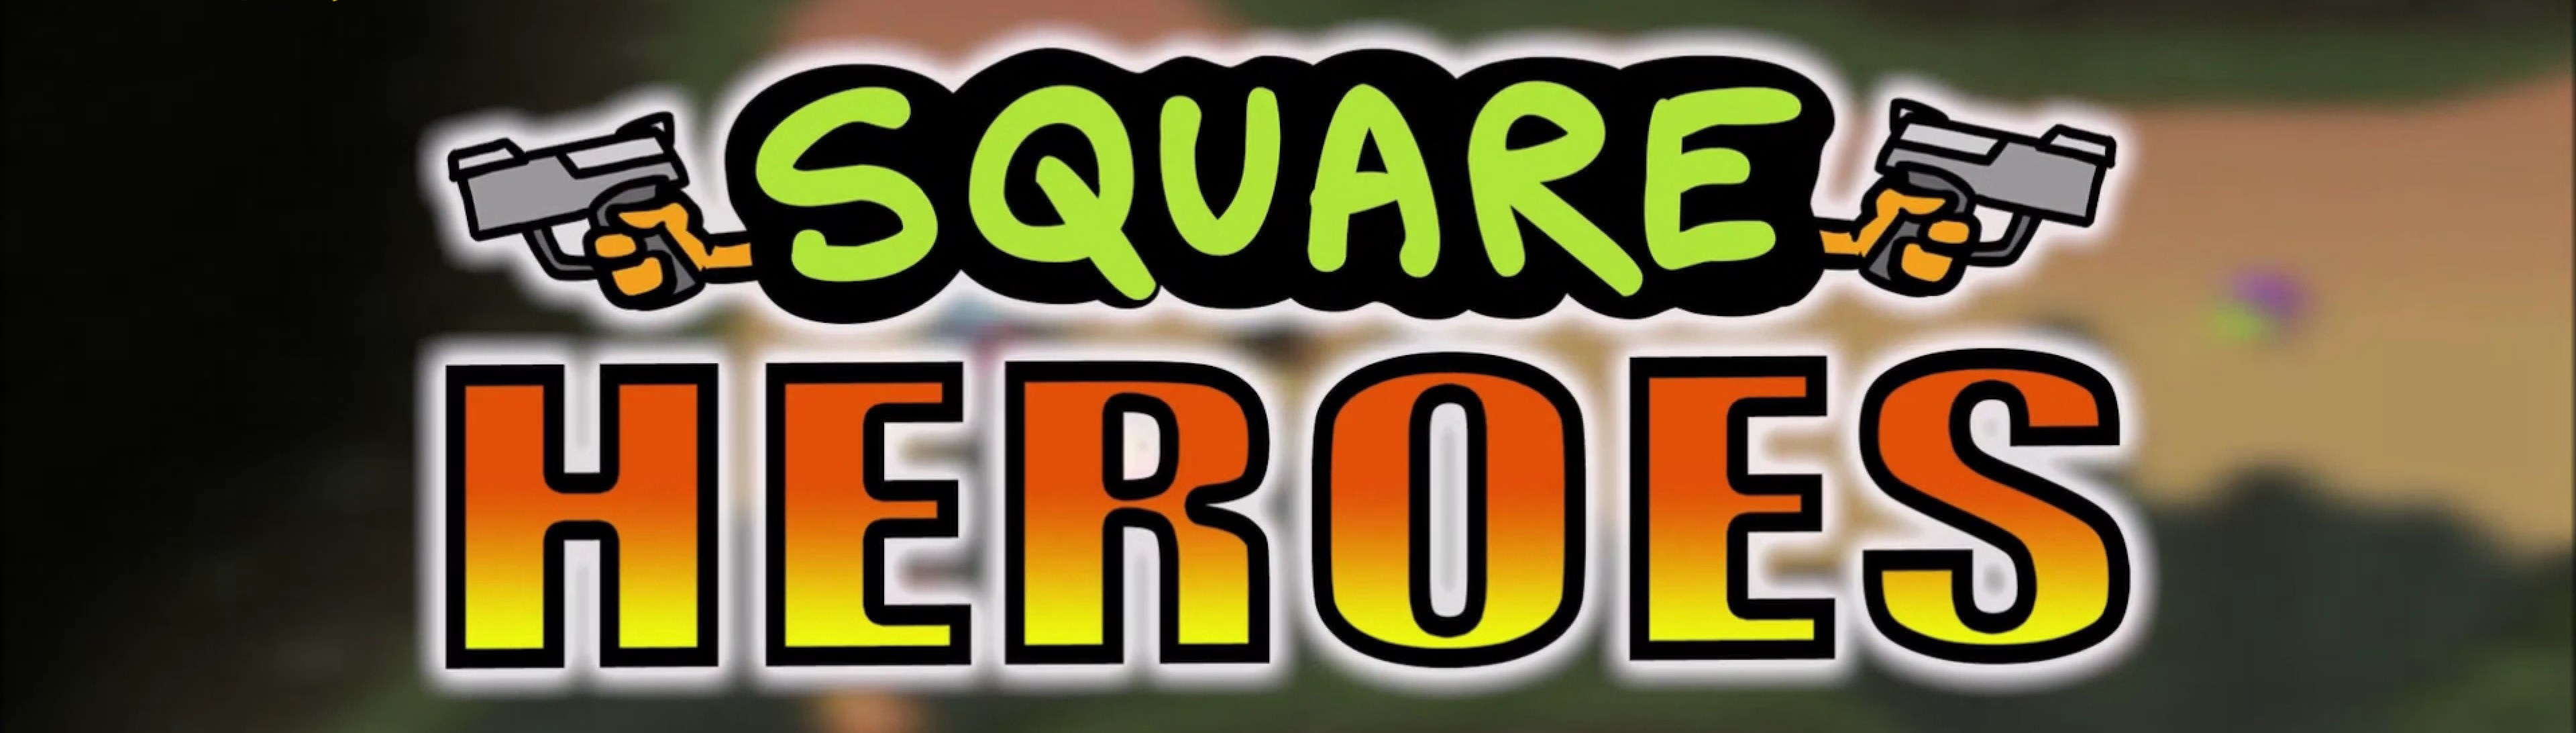 square heroes